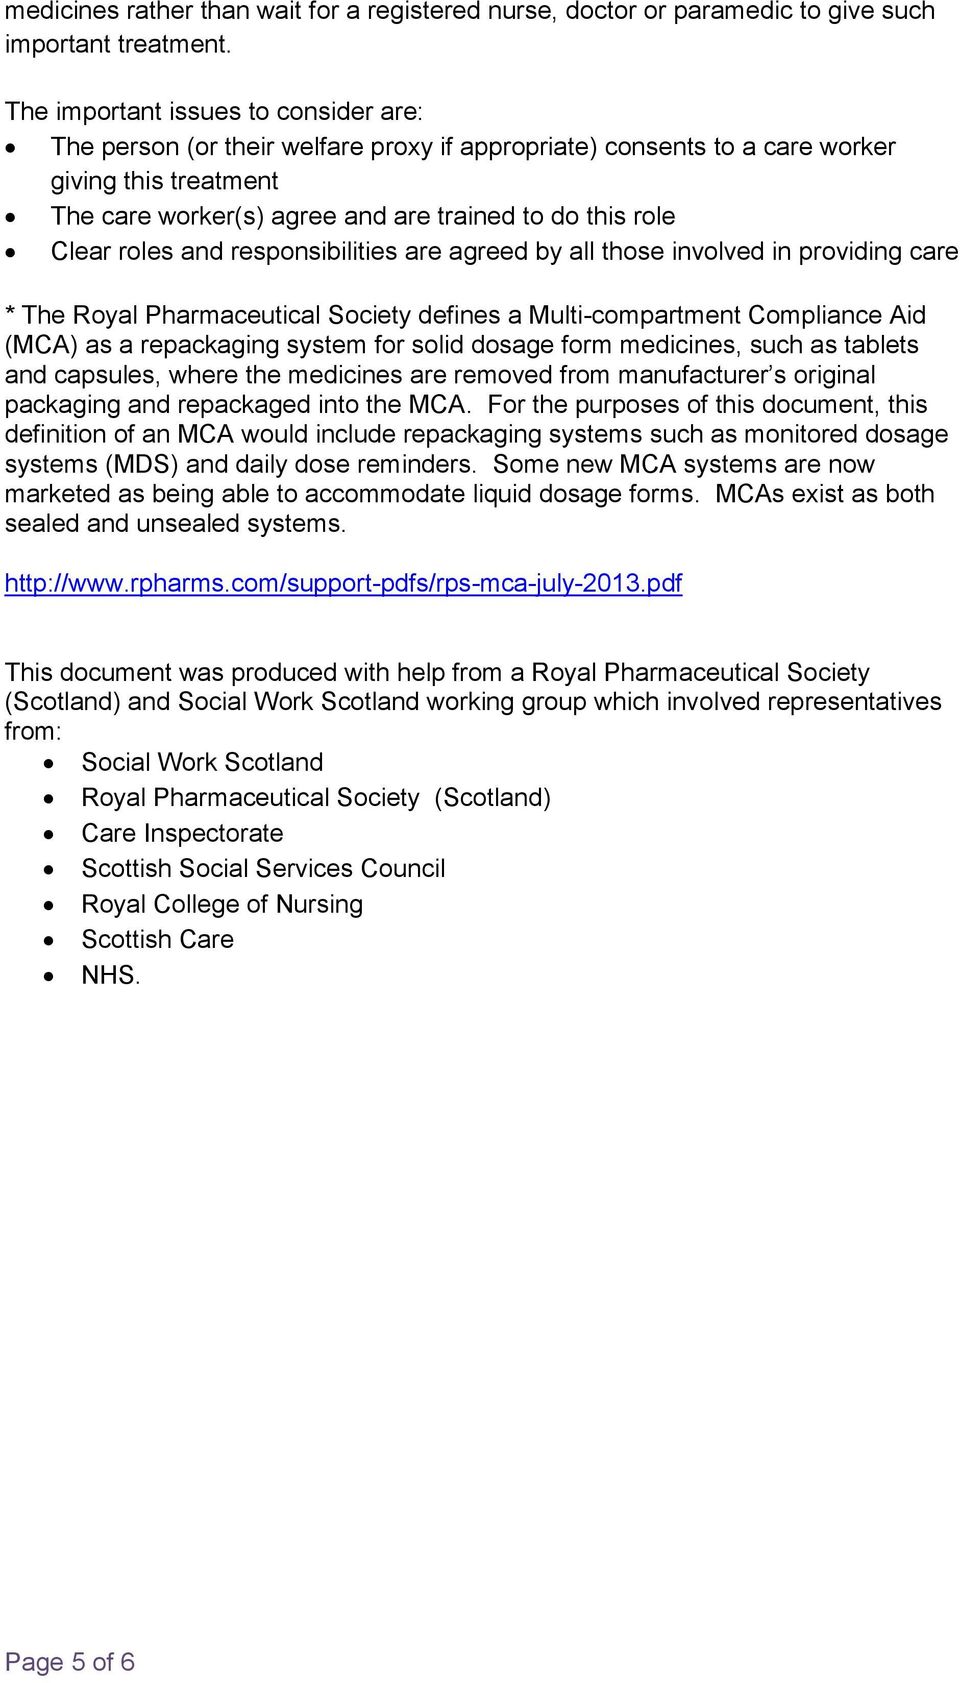 roles and responsibilities are agreed by all those involved in providing care * The Royal Pharmaceutical Society defines a Multi-compartment Compliance Aid (MCA) as a repackaging system for solid